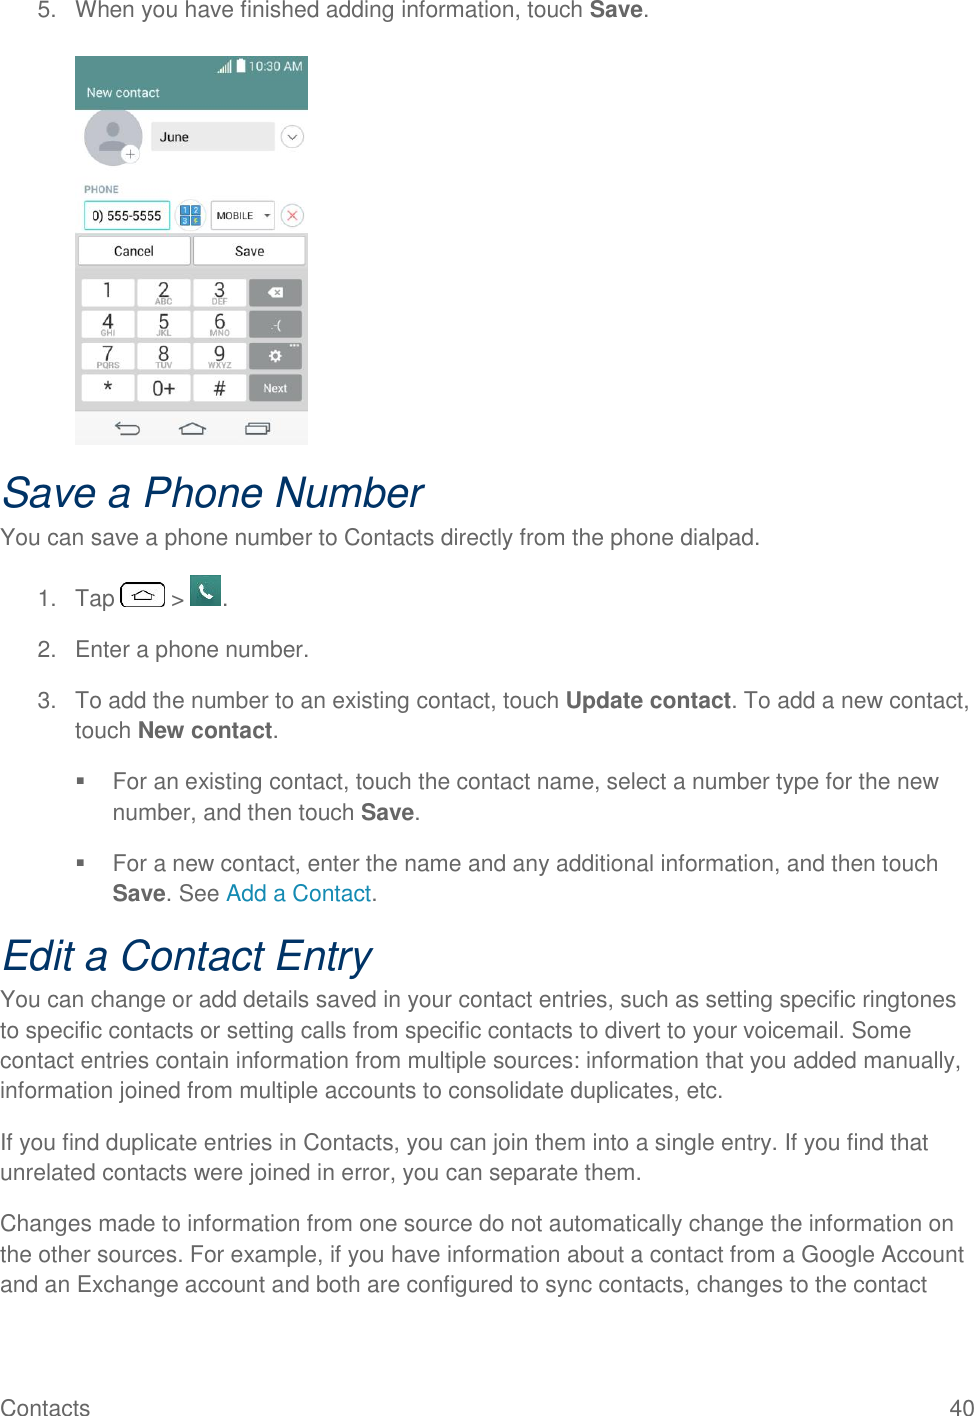 Contacts  40 5.  When you have finished adding information, touch Save.   Save a Phone Number You can save a phone number to Contacts directly from the phone dialpad. 1.  Tap   &gt;  . 2.  Enter a phone number. 3.  To add the number to an existing contact, touch Update contact. To add a new contact, touch New contact.   For an existing contact, touch the contact name, select a number type for the new number, and then touch Save.   For a new contact, enter the name and any additional information, and then touch Save. See Add a Contact. Edit a Contact Entry You can change or add details saved in your contact entries, such as setting specific ringtones to specific contacts or setting calls from specific contacts to divert to your voicemail. Some contact entries contain information from multiple sources: information that you added manually, information joined from multiple accounts to consolidate duplicates, etc. If you find duplicate entries in Contacts, you can join them into a single entry. If you find that unrelated contacts were joined in error, you can separate them. Changes made to information from one source do not automatically change the information on the other sources. For example, if you have information about a contact from a Google Account and an Exchange account and both are configured to sync contacts, changes to the contact 